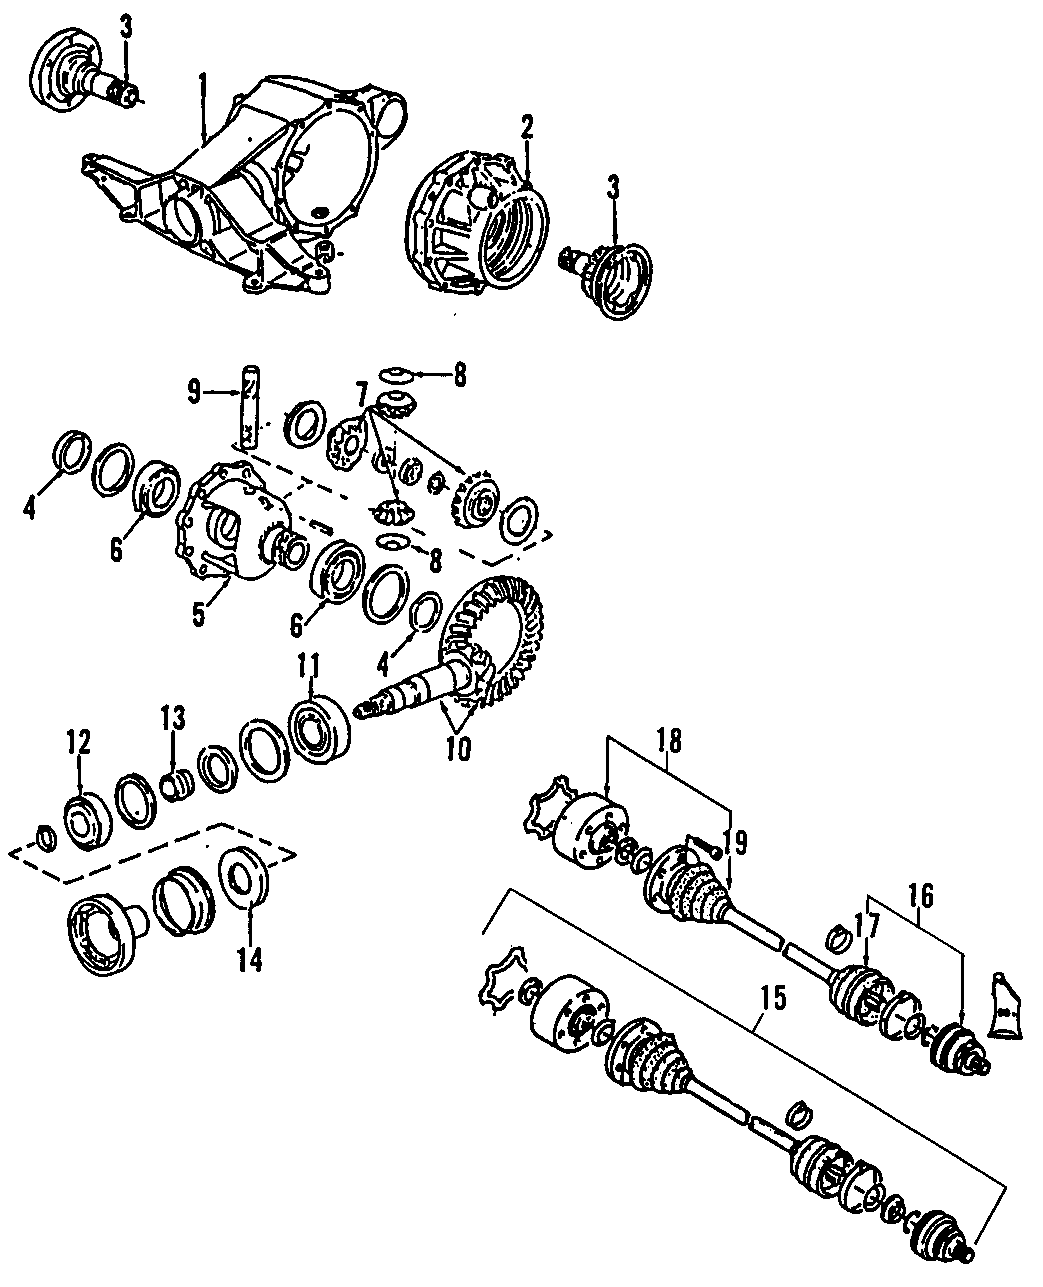 19DRIVE AXLES. REAR AXLE. AXLE SHAFTS & JOINTS. DIFFERENTIAL. PROPELLER SHAFT.https://images.simplepart.com/images/parts/motor/fullsize/E255240.png